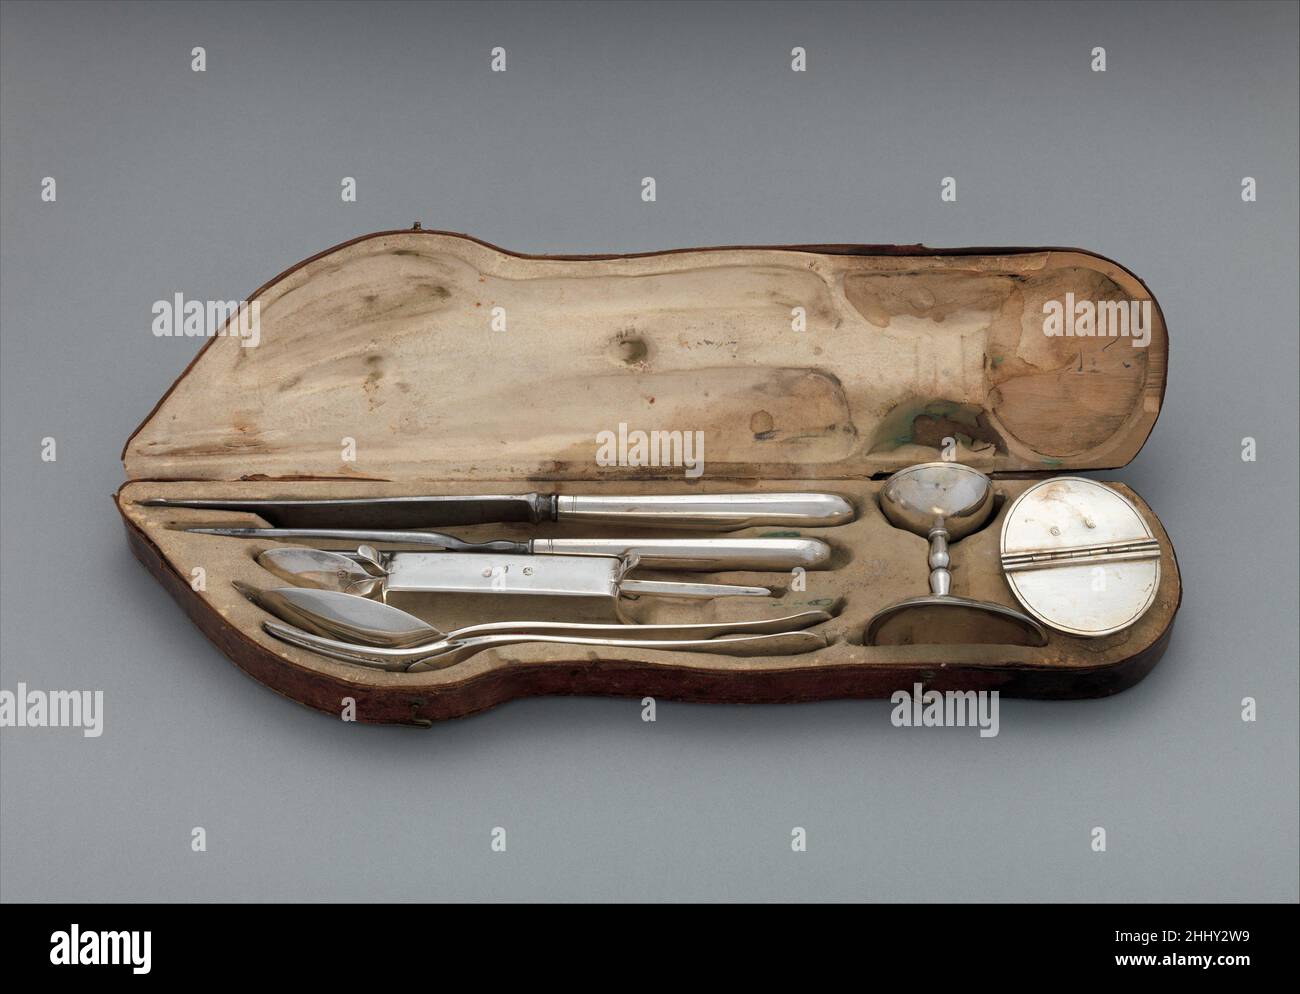 https://c8.alamy.com/comp/2HHY2W9/traveling-set-in-leather-case-mid-18th-century-hungarian-it-is-amazing-that-eight-implements-could-be-compressed-into-this-leather-case-though-similar-in-its-ingredients-to-german-traveling-sets-this-hungarian-version-also-includes-a-type-of-cutlery-rest-in-the-form-of-a-rod-raised-on-legs-that-would-have-helped-protect-a-tablecloth-or-precious-table-surface-it-is-also-remarkable-that-function-and-not-ostentatious-display-governed-the-design-of-each-implement-see-istvn-heller-ungarische-und-siebenbrgische-goldschmiedearbeiten-vom-ende-des-16-jahrhunderts-bis-zum-ende-des-19-jahrhun-2HHY2W9.jpg